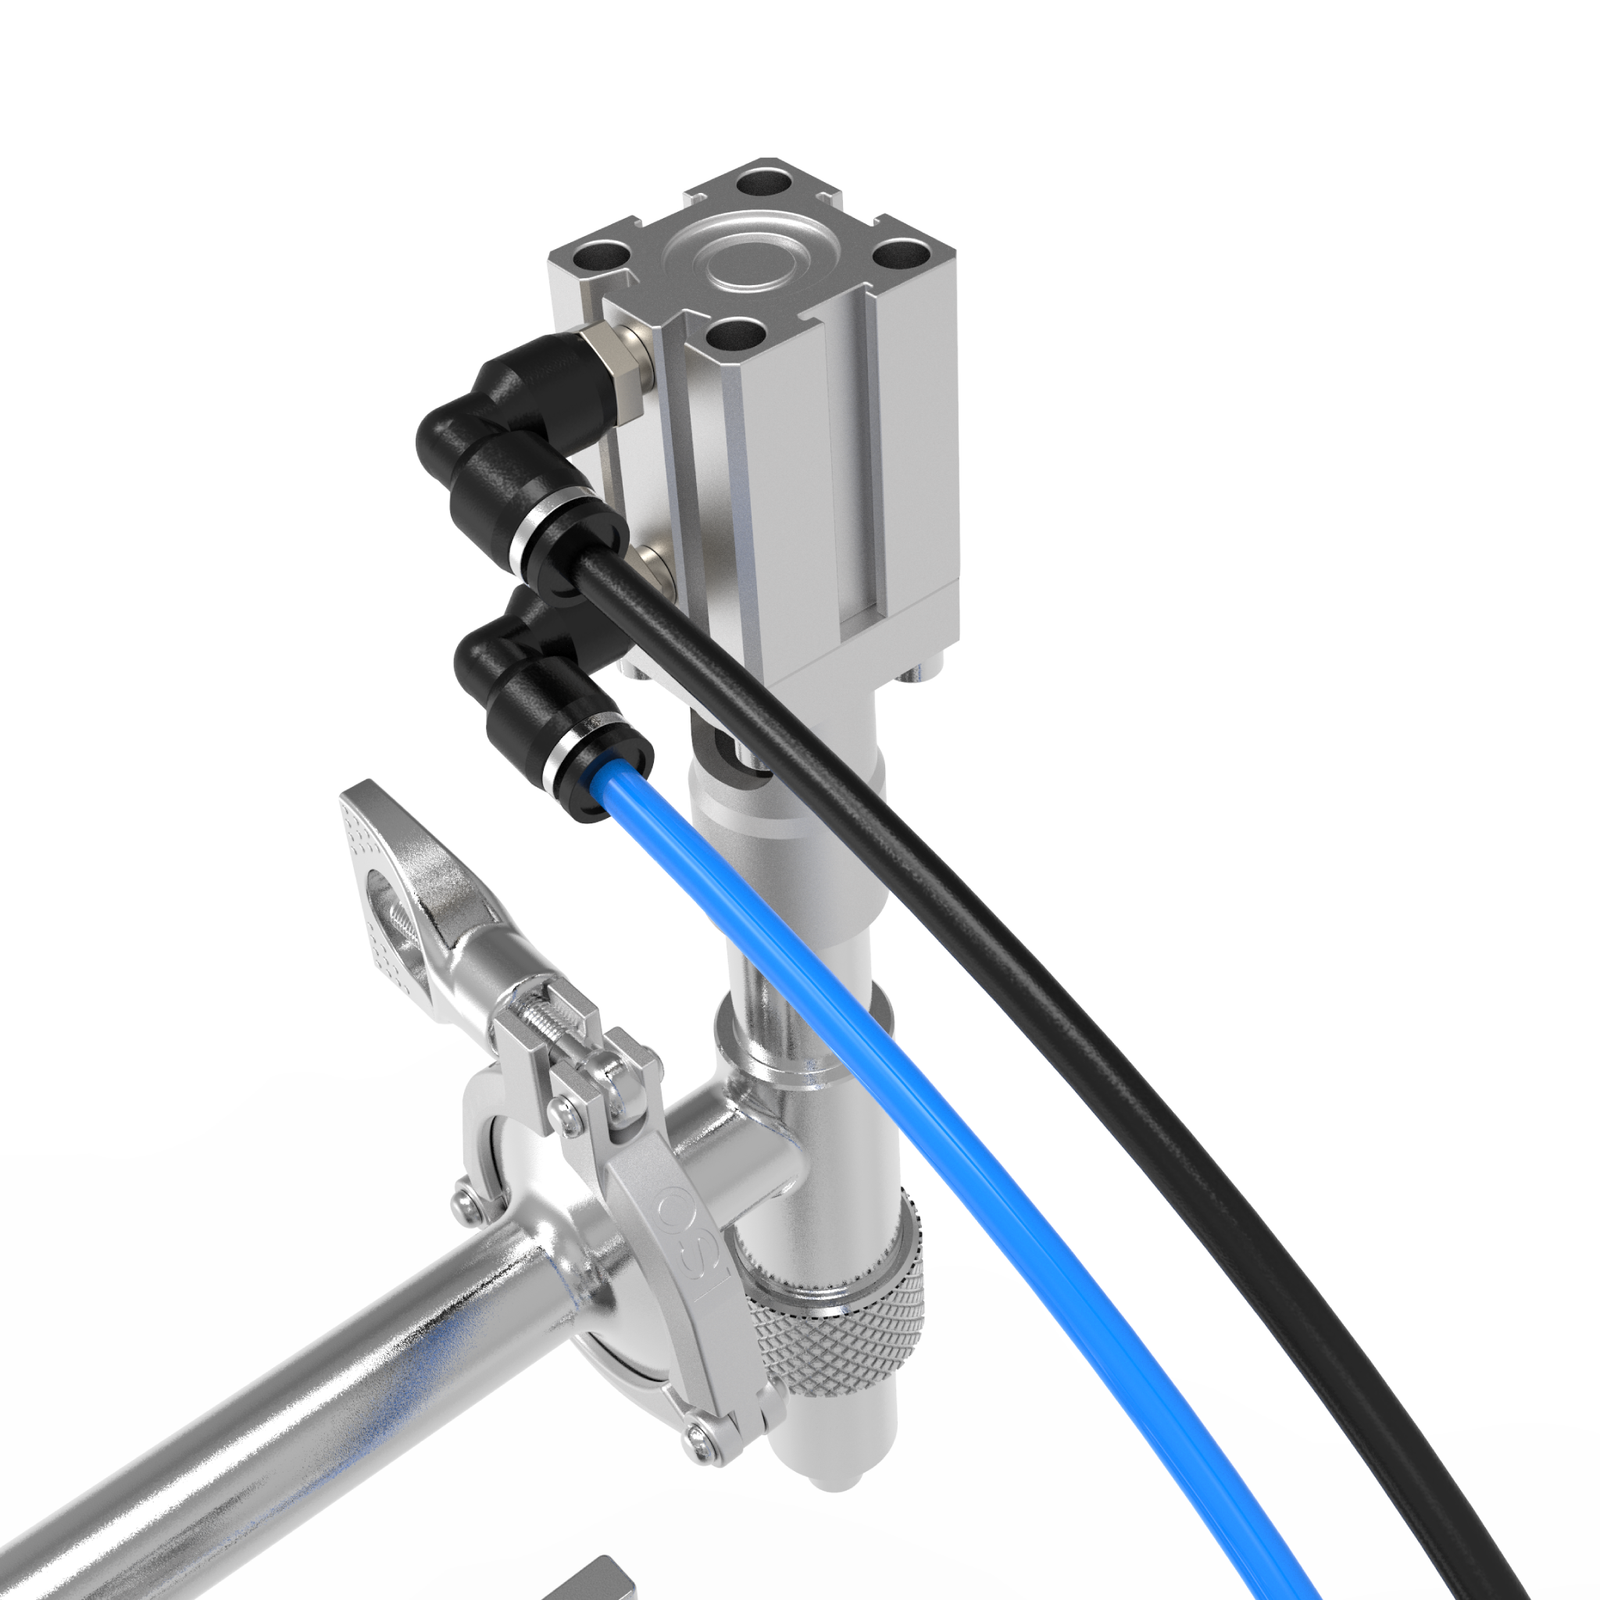 Closeup of the Non-drip liquid dispensing nozzle, compressed air hoses, and triclamp attachment for tool-less machine disassembly